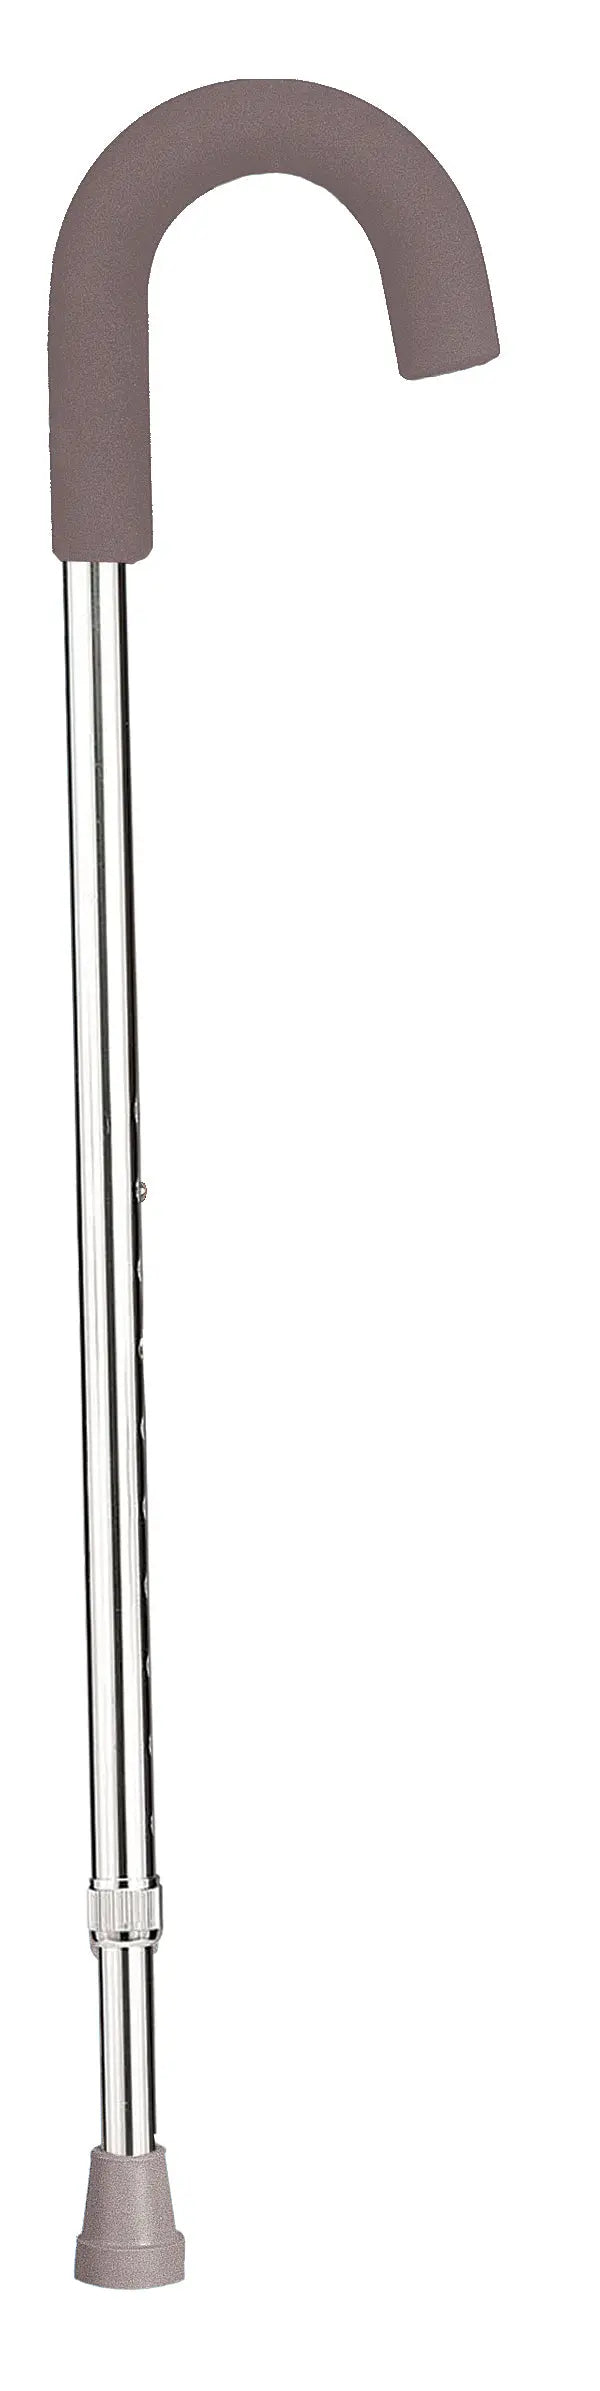 Aluminum Round Handle Cane with Foam Grip - Home Health Store Inc